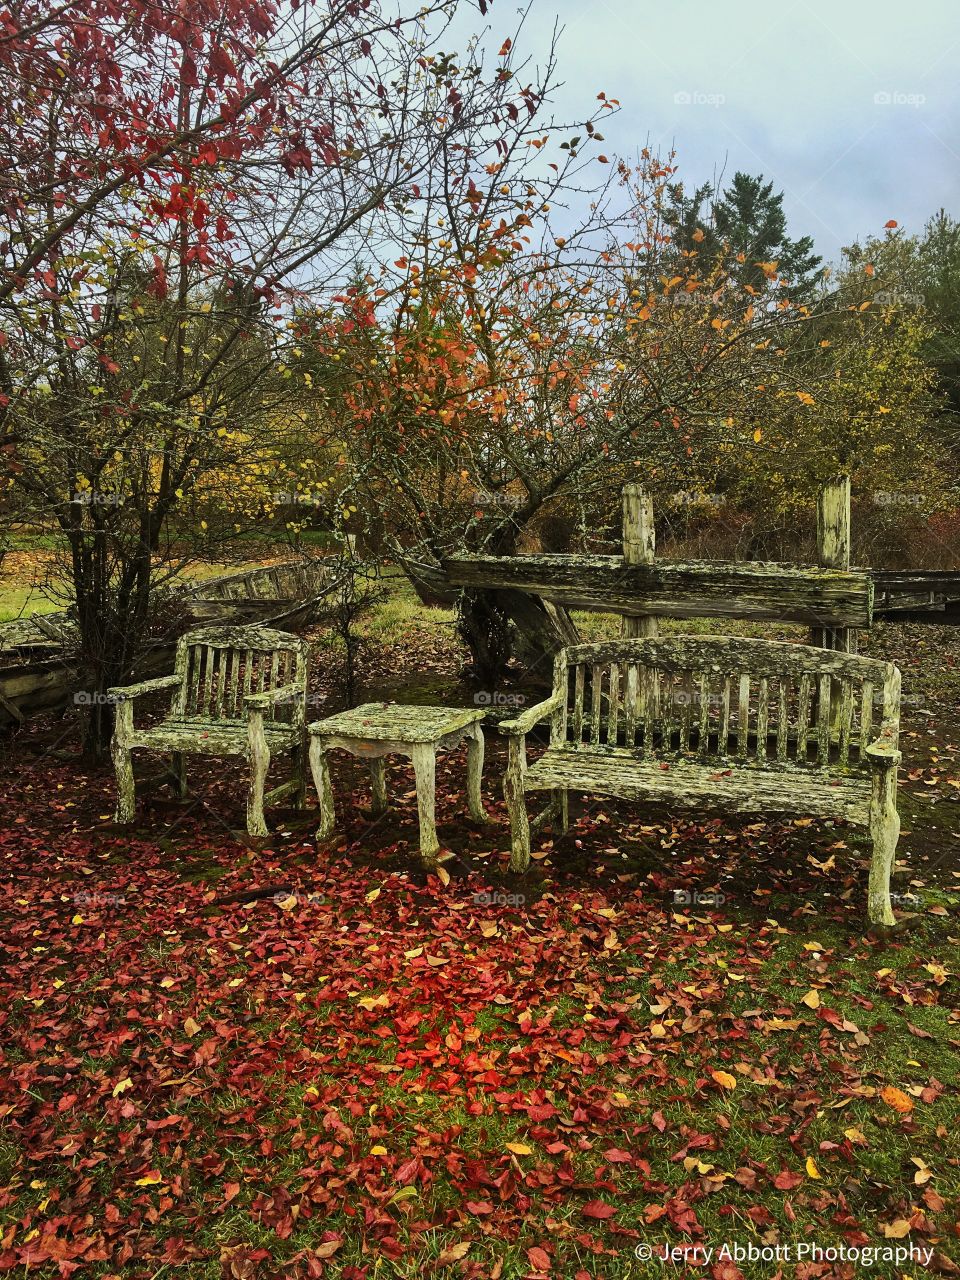 Antique Chair and Bench in Serene Autumn Island Park Setting - Nostalgic Reflection 